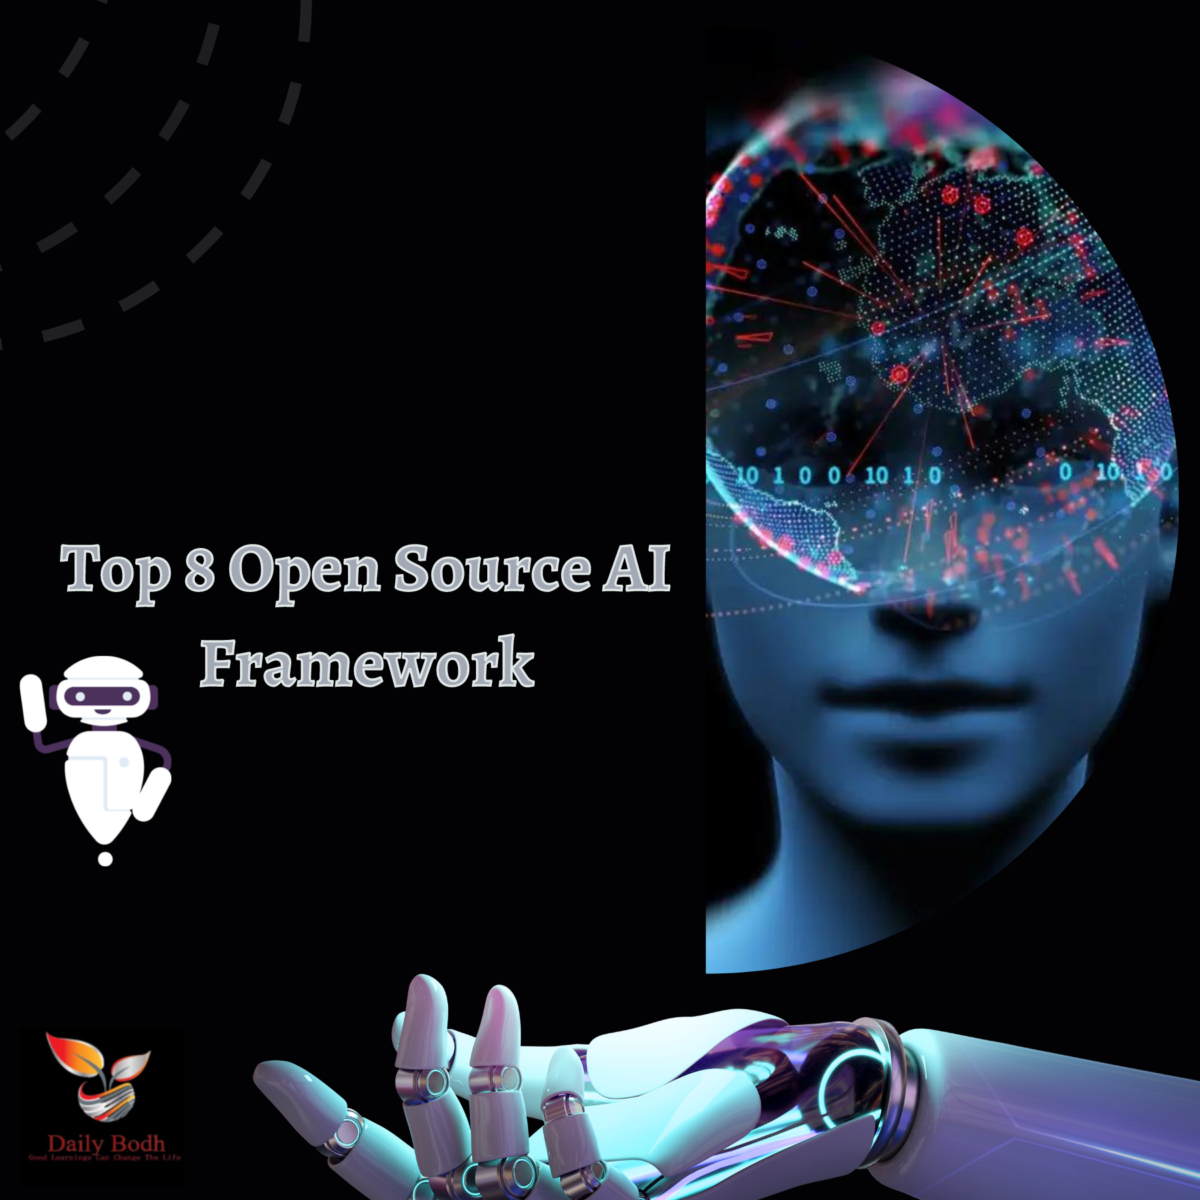 You are currently viewing Open Source AI Framework – Top 8 Sources